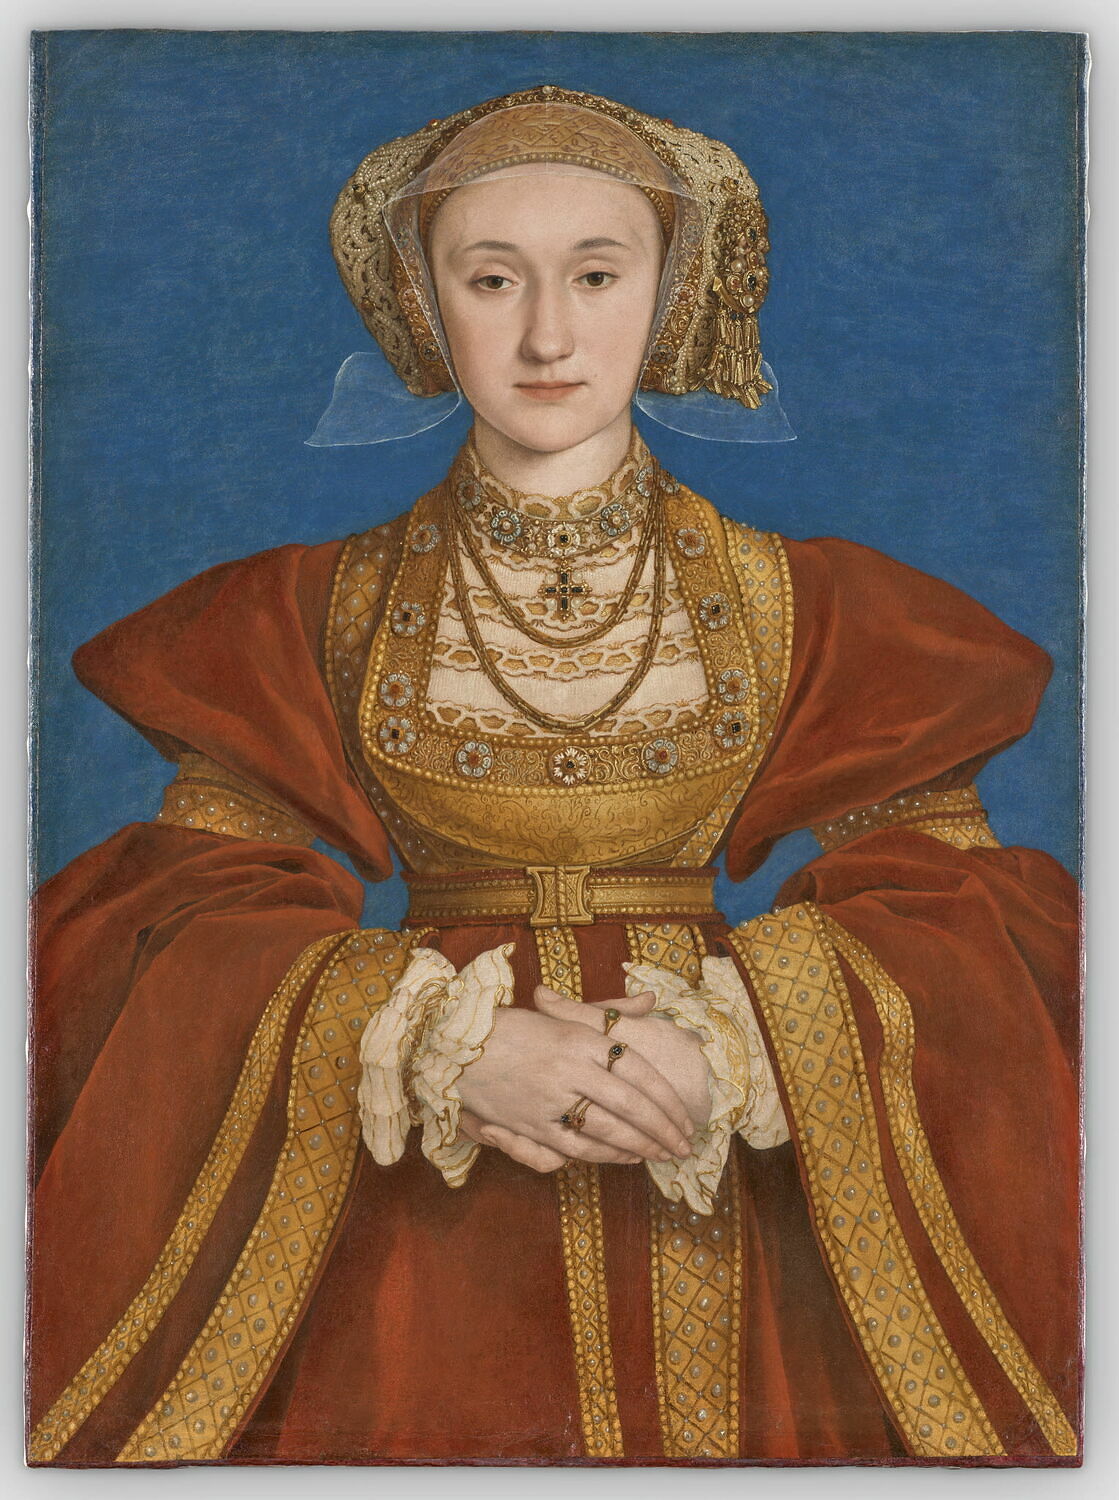 The Louvre Gives Its Anne of Cleves Portrait a Massive Glow-Up